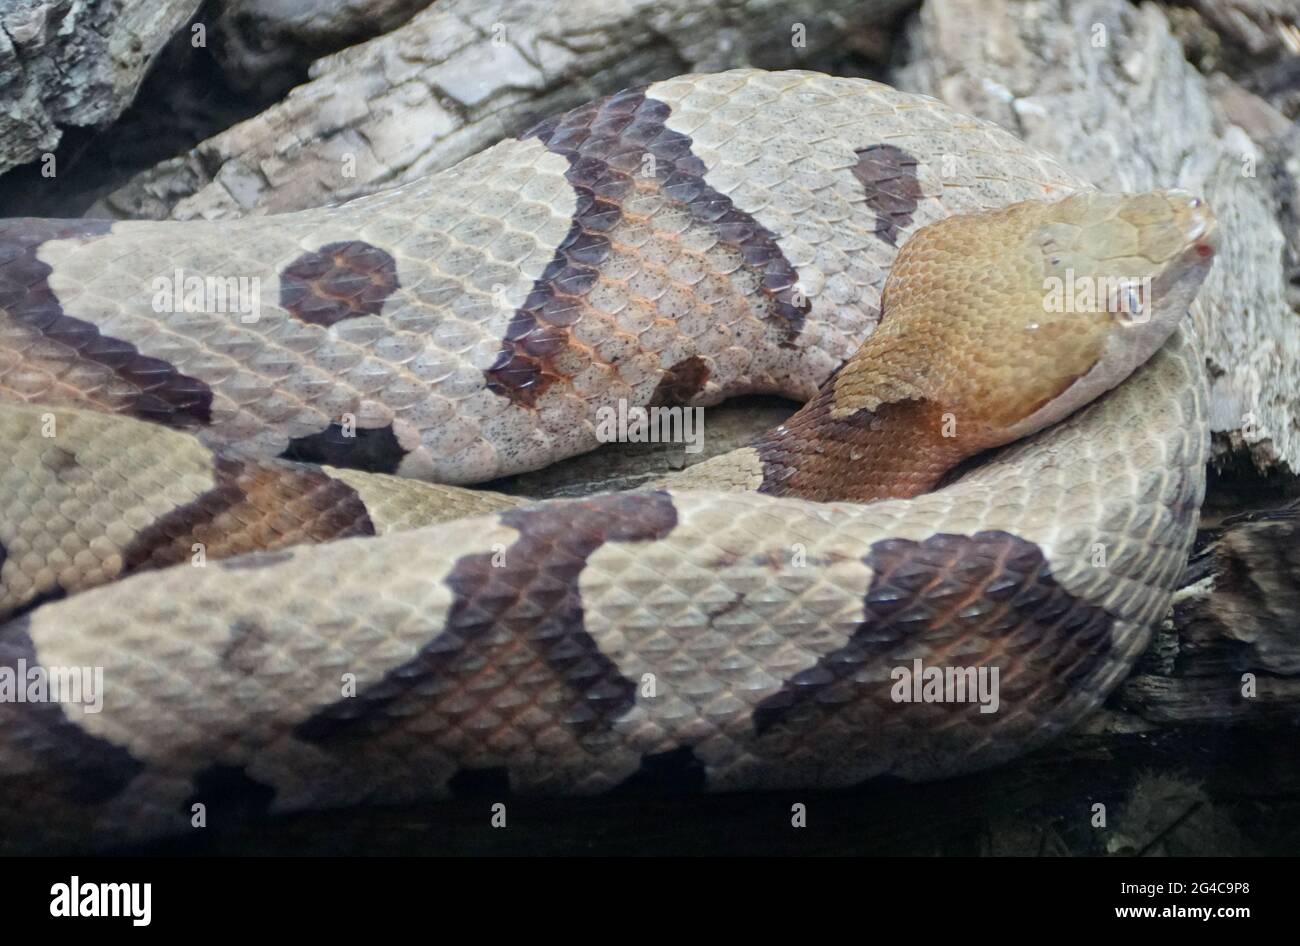 Close up of the beautiful patterns of a Northern Copperhead, a venomous snake from Central and Eastern United States of America Stock Photo